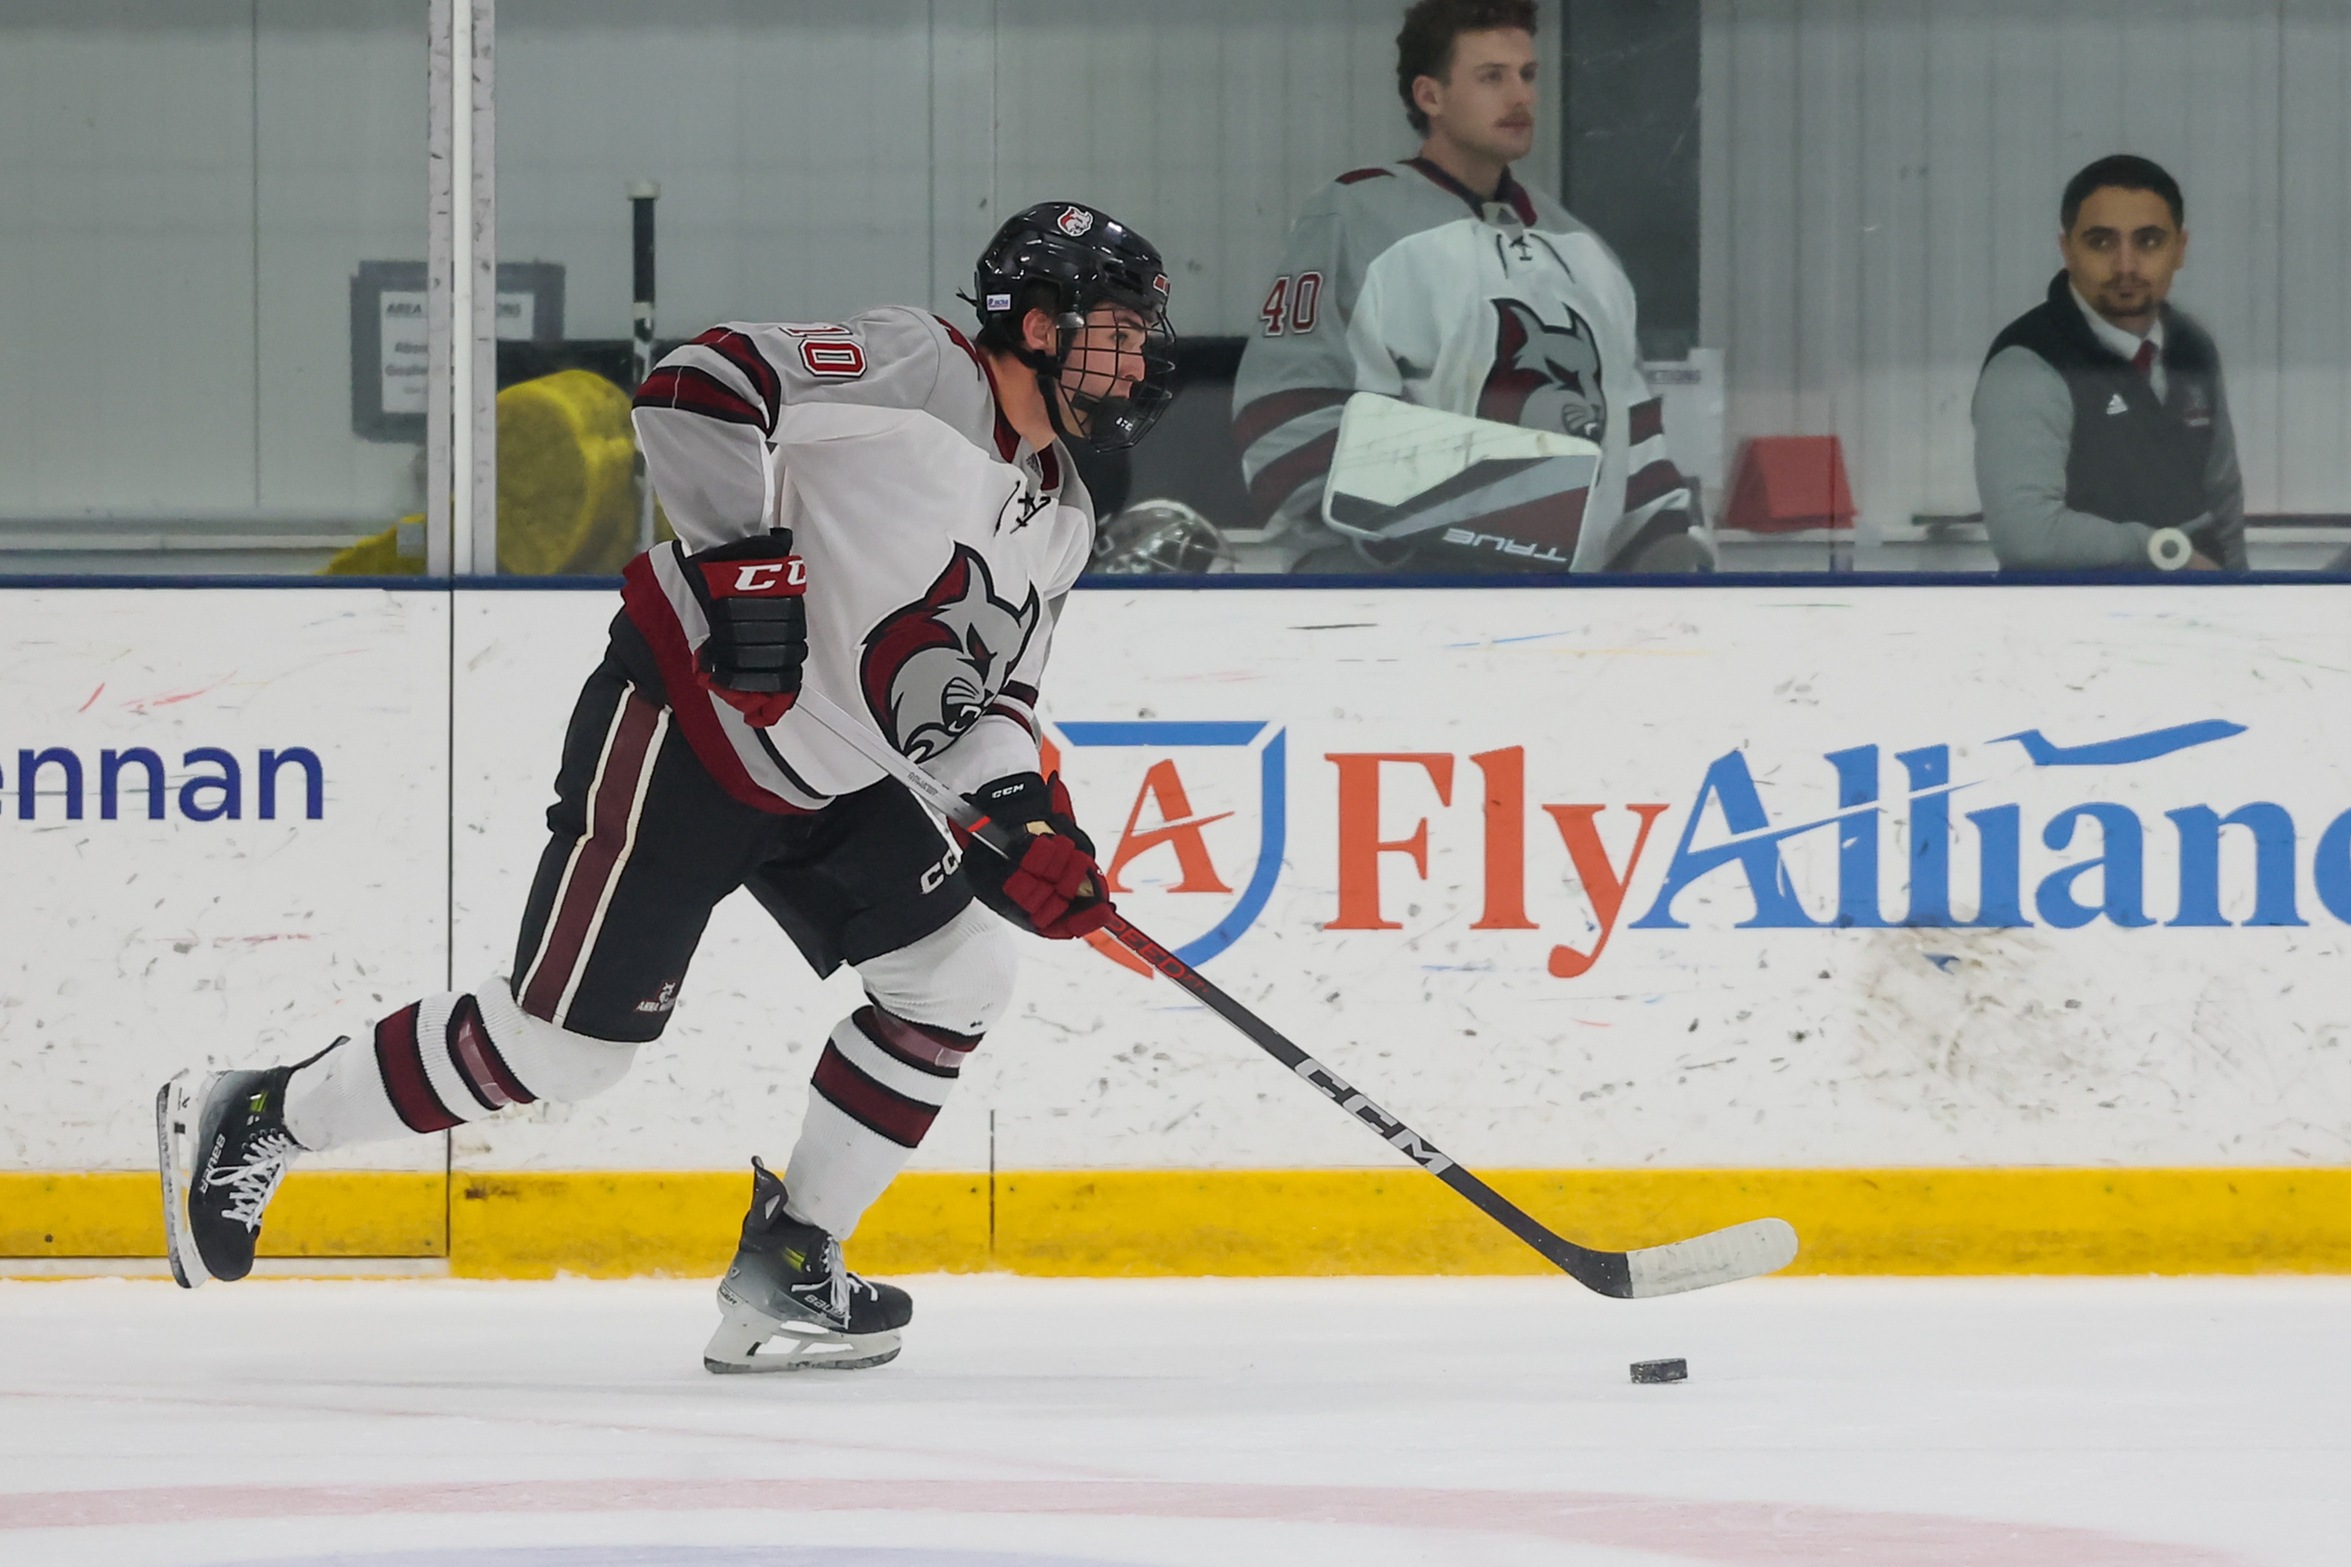 Men's Hockey Can't Come Back In 4-3 Loss To Greyhounds